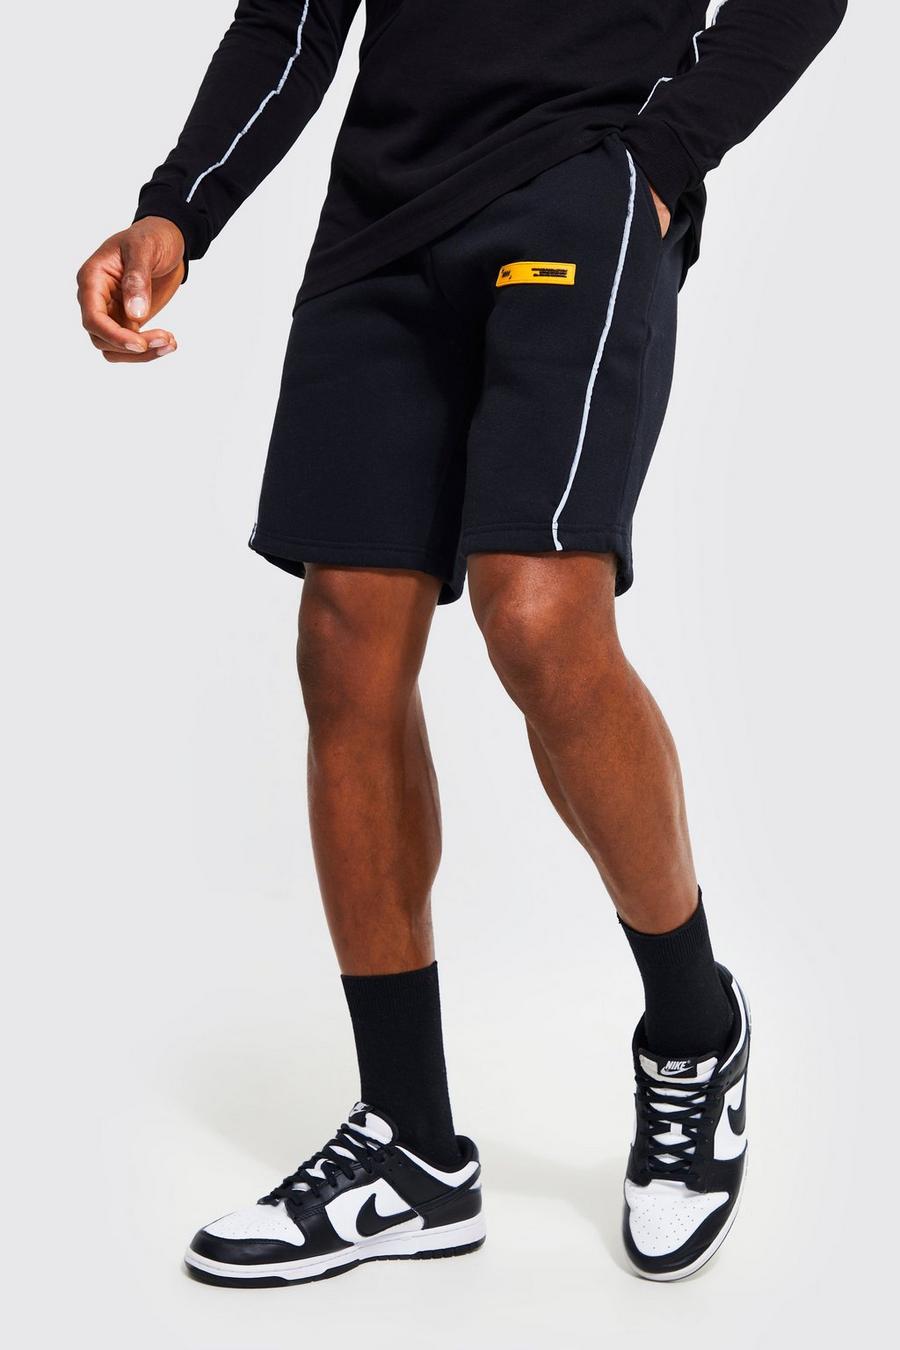 Black noir Regular Fit Short With Reflective Piping